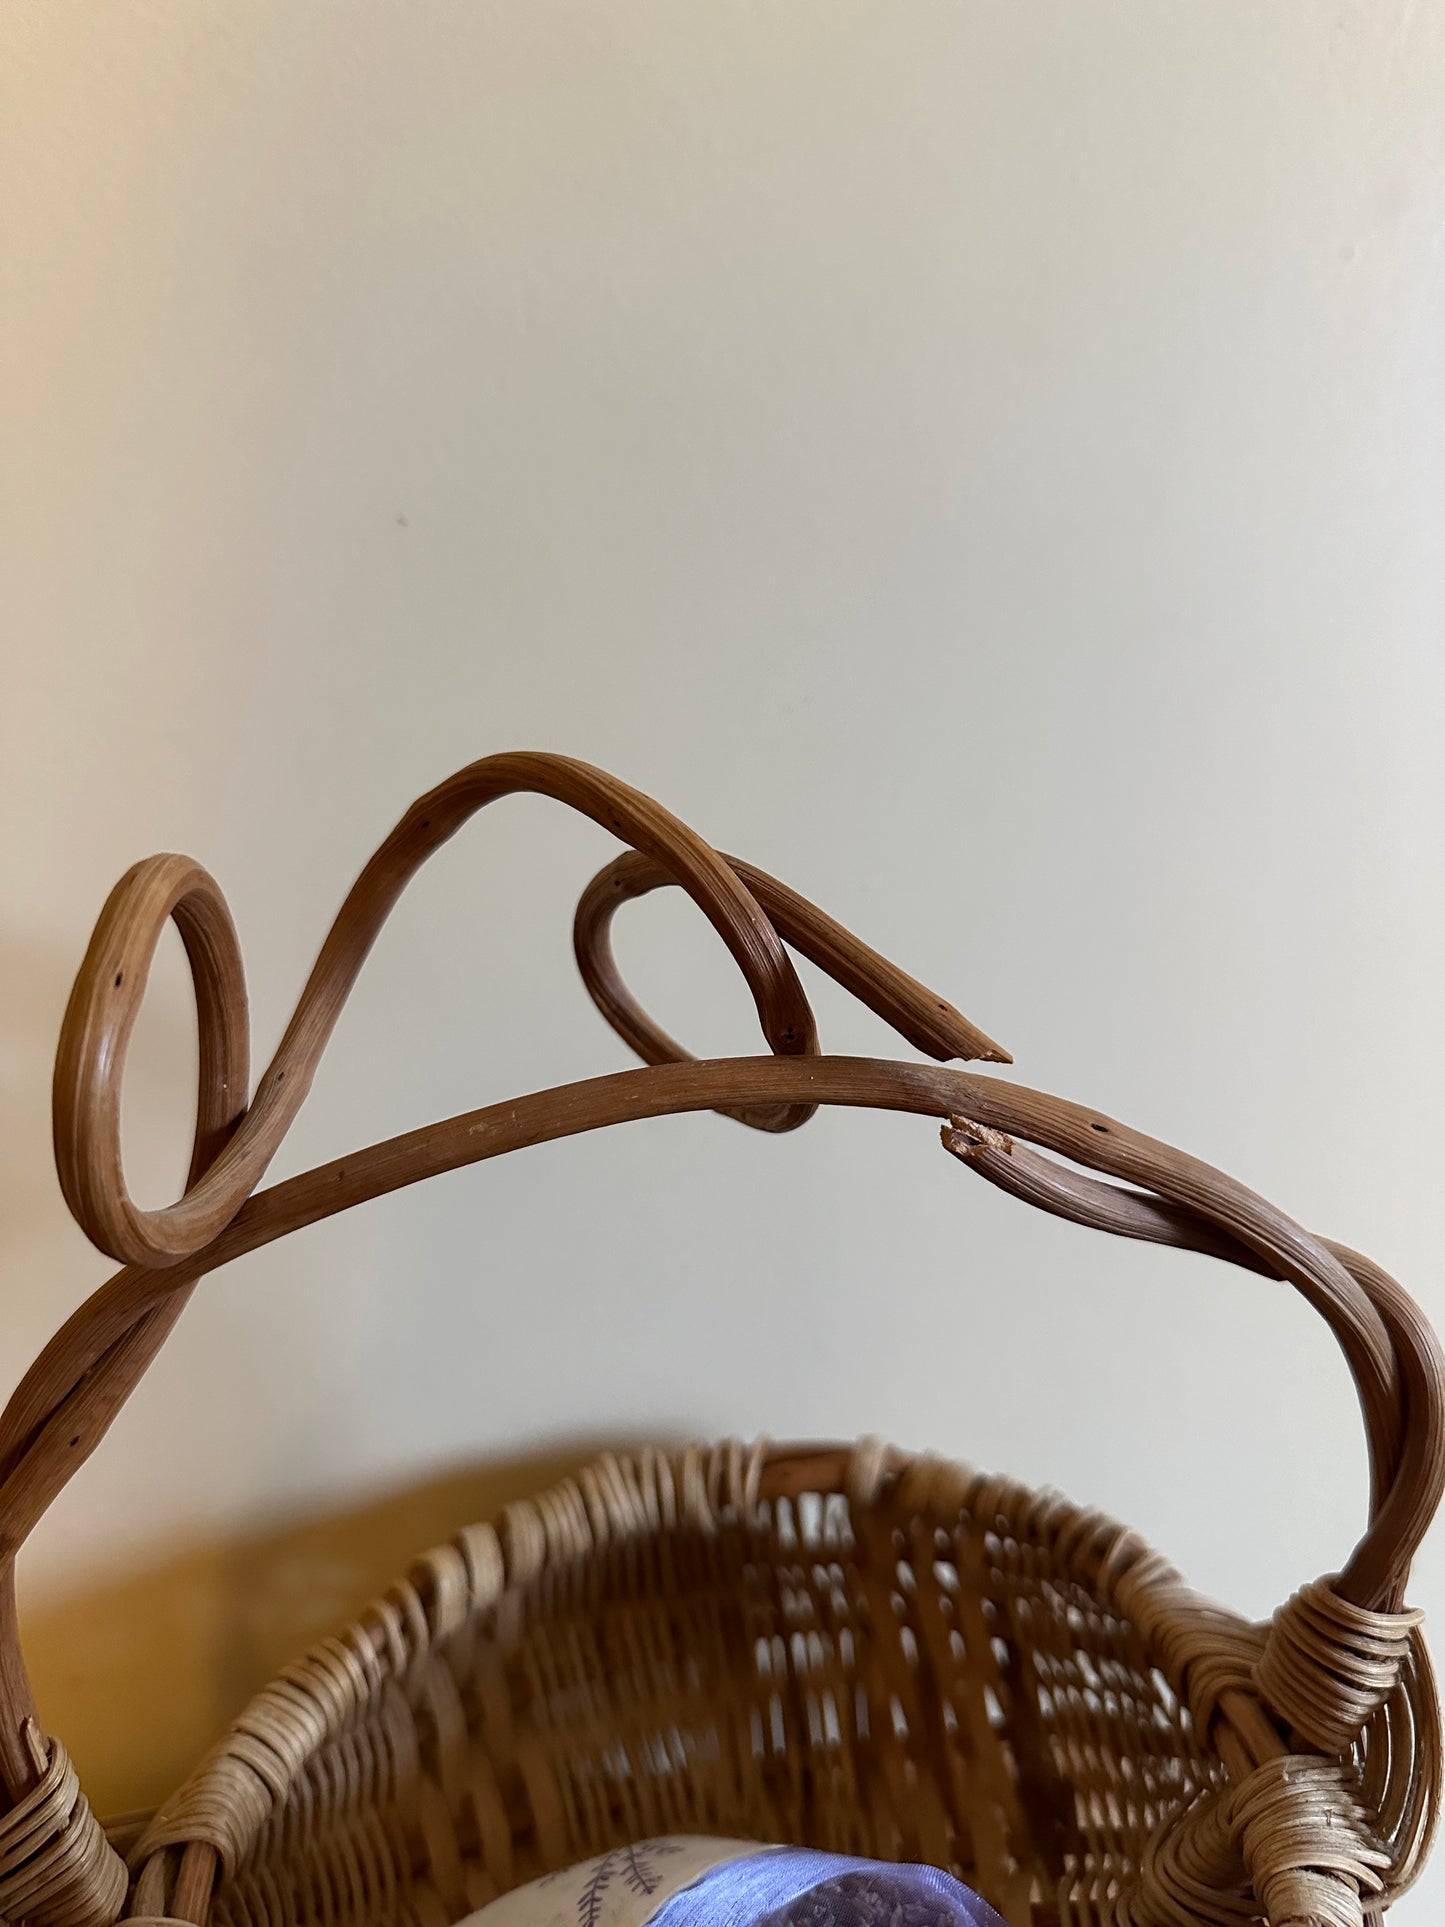 Vintage Twisted Willow Handle Buttocks Weave Basket